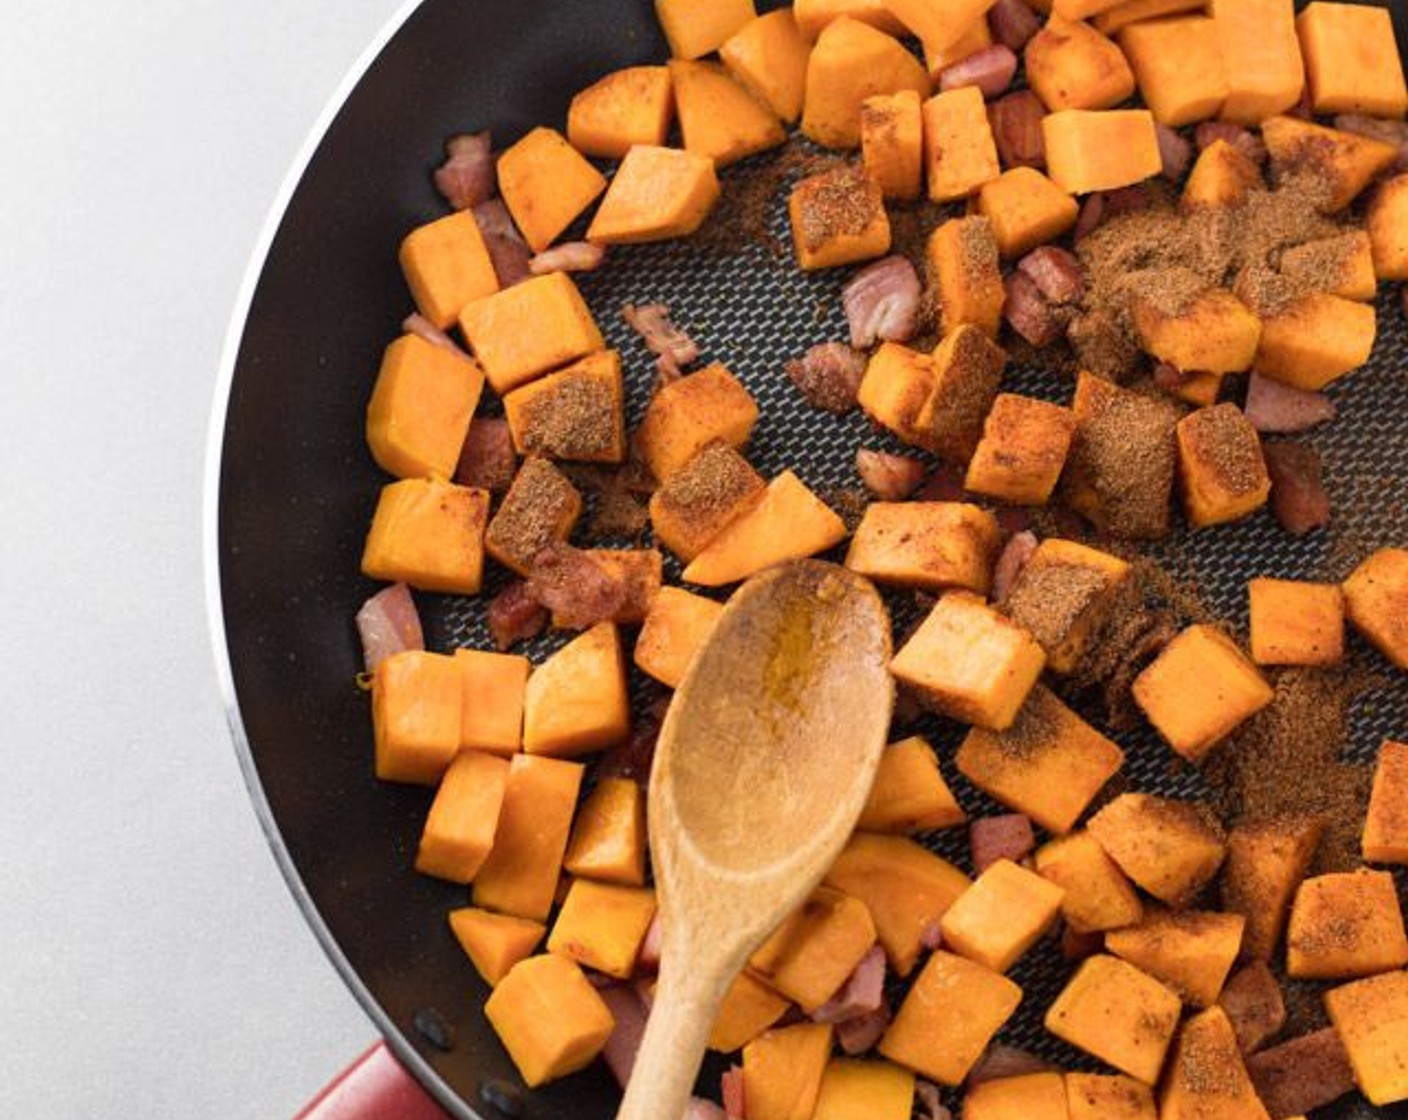 step 4 Once the coconut oil melts, add the Sweet Potatoes (3 cups). Cook until potatoes start to brown, stirring occasionally, 5-10 minutes.